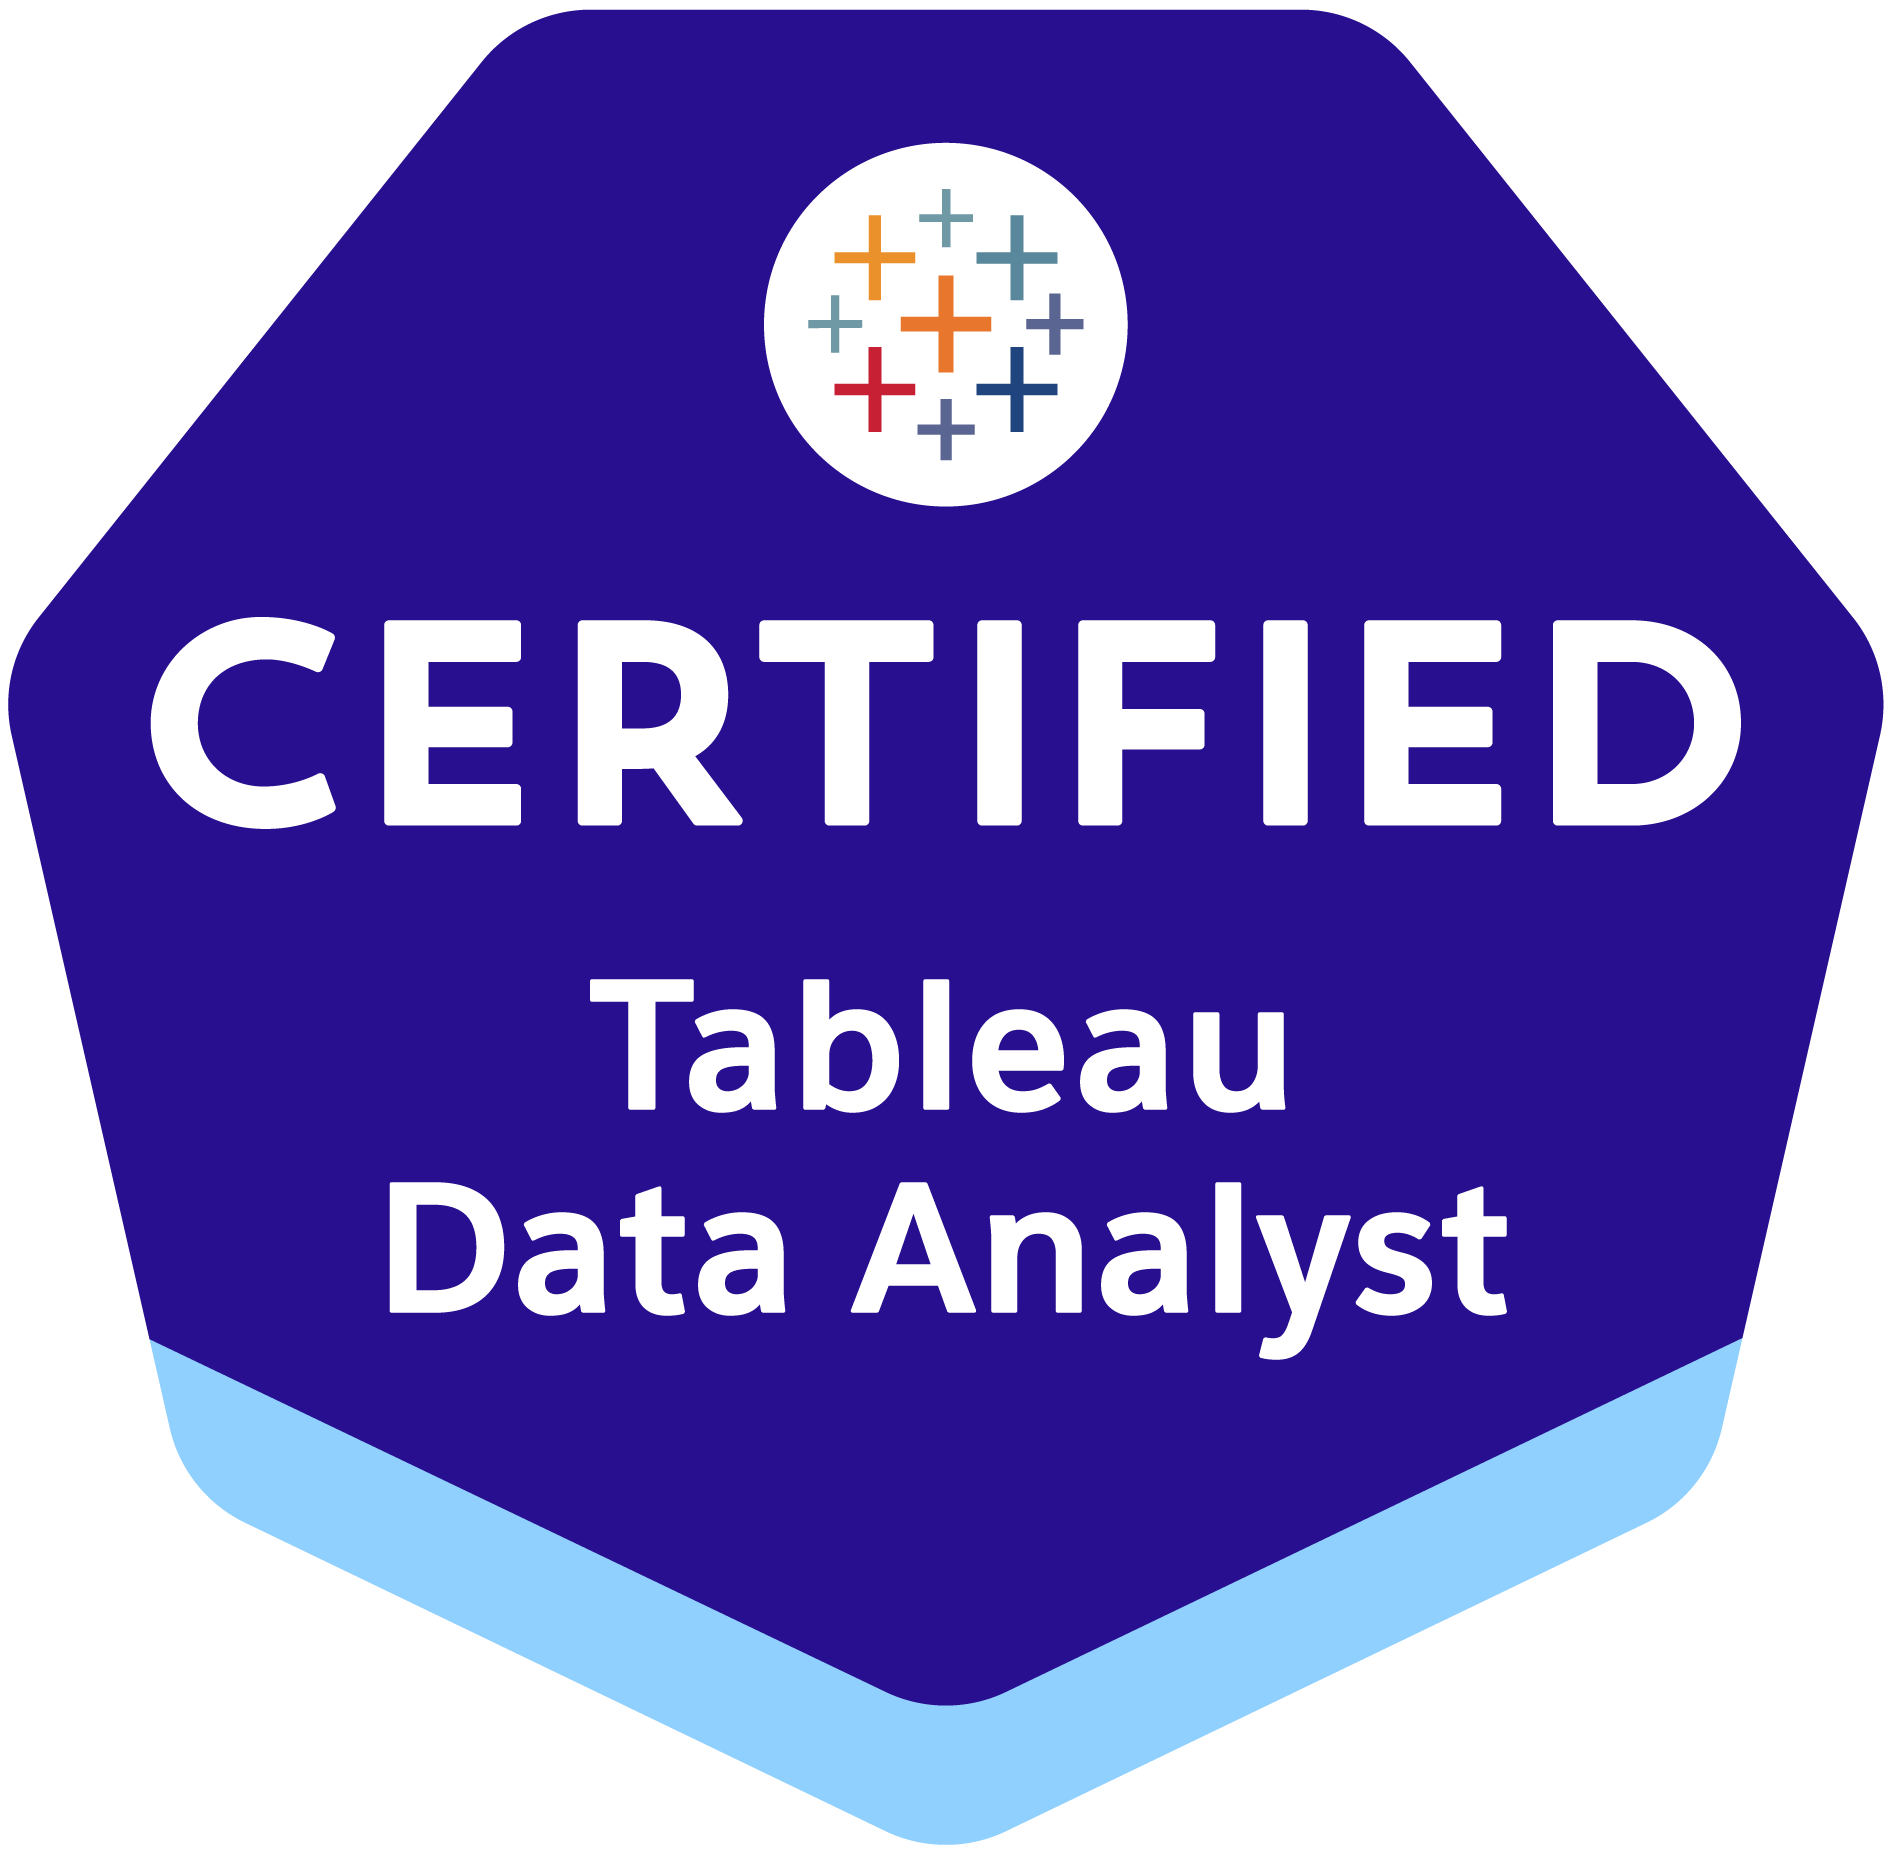 The Tableau certified professional certification for data analysts badge